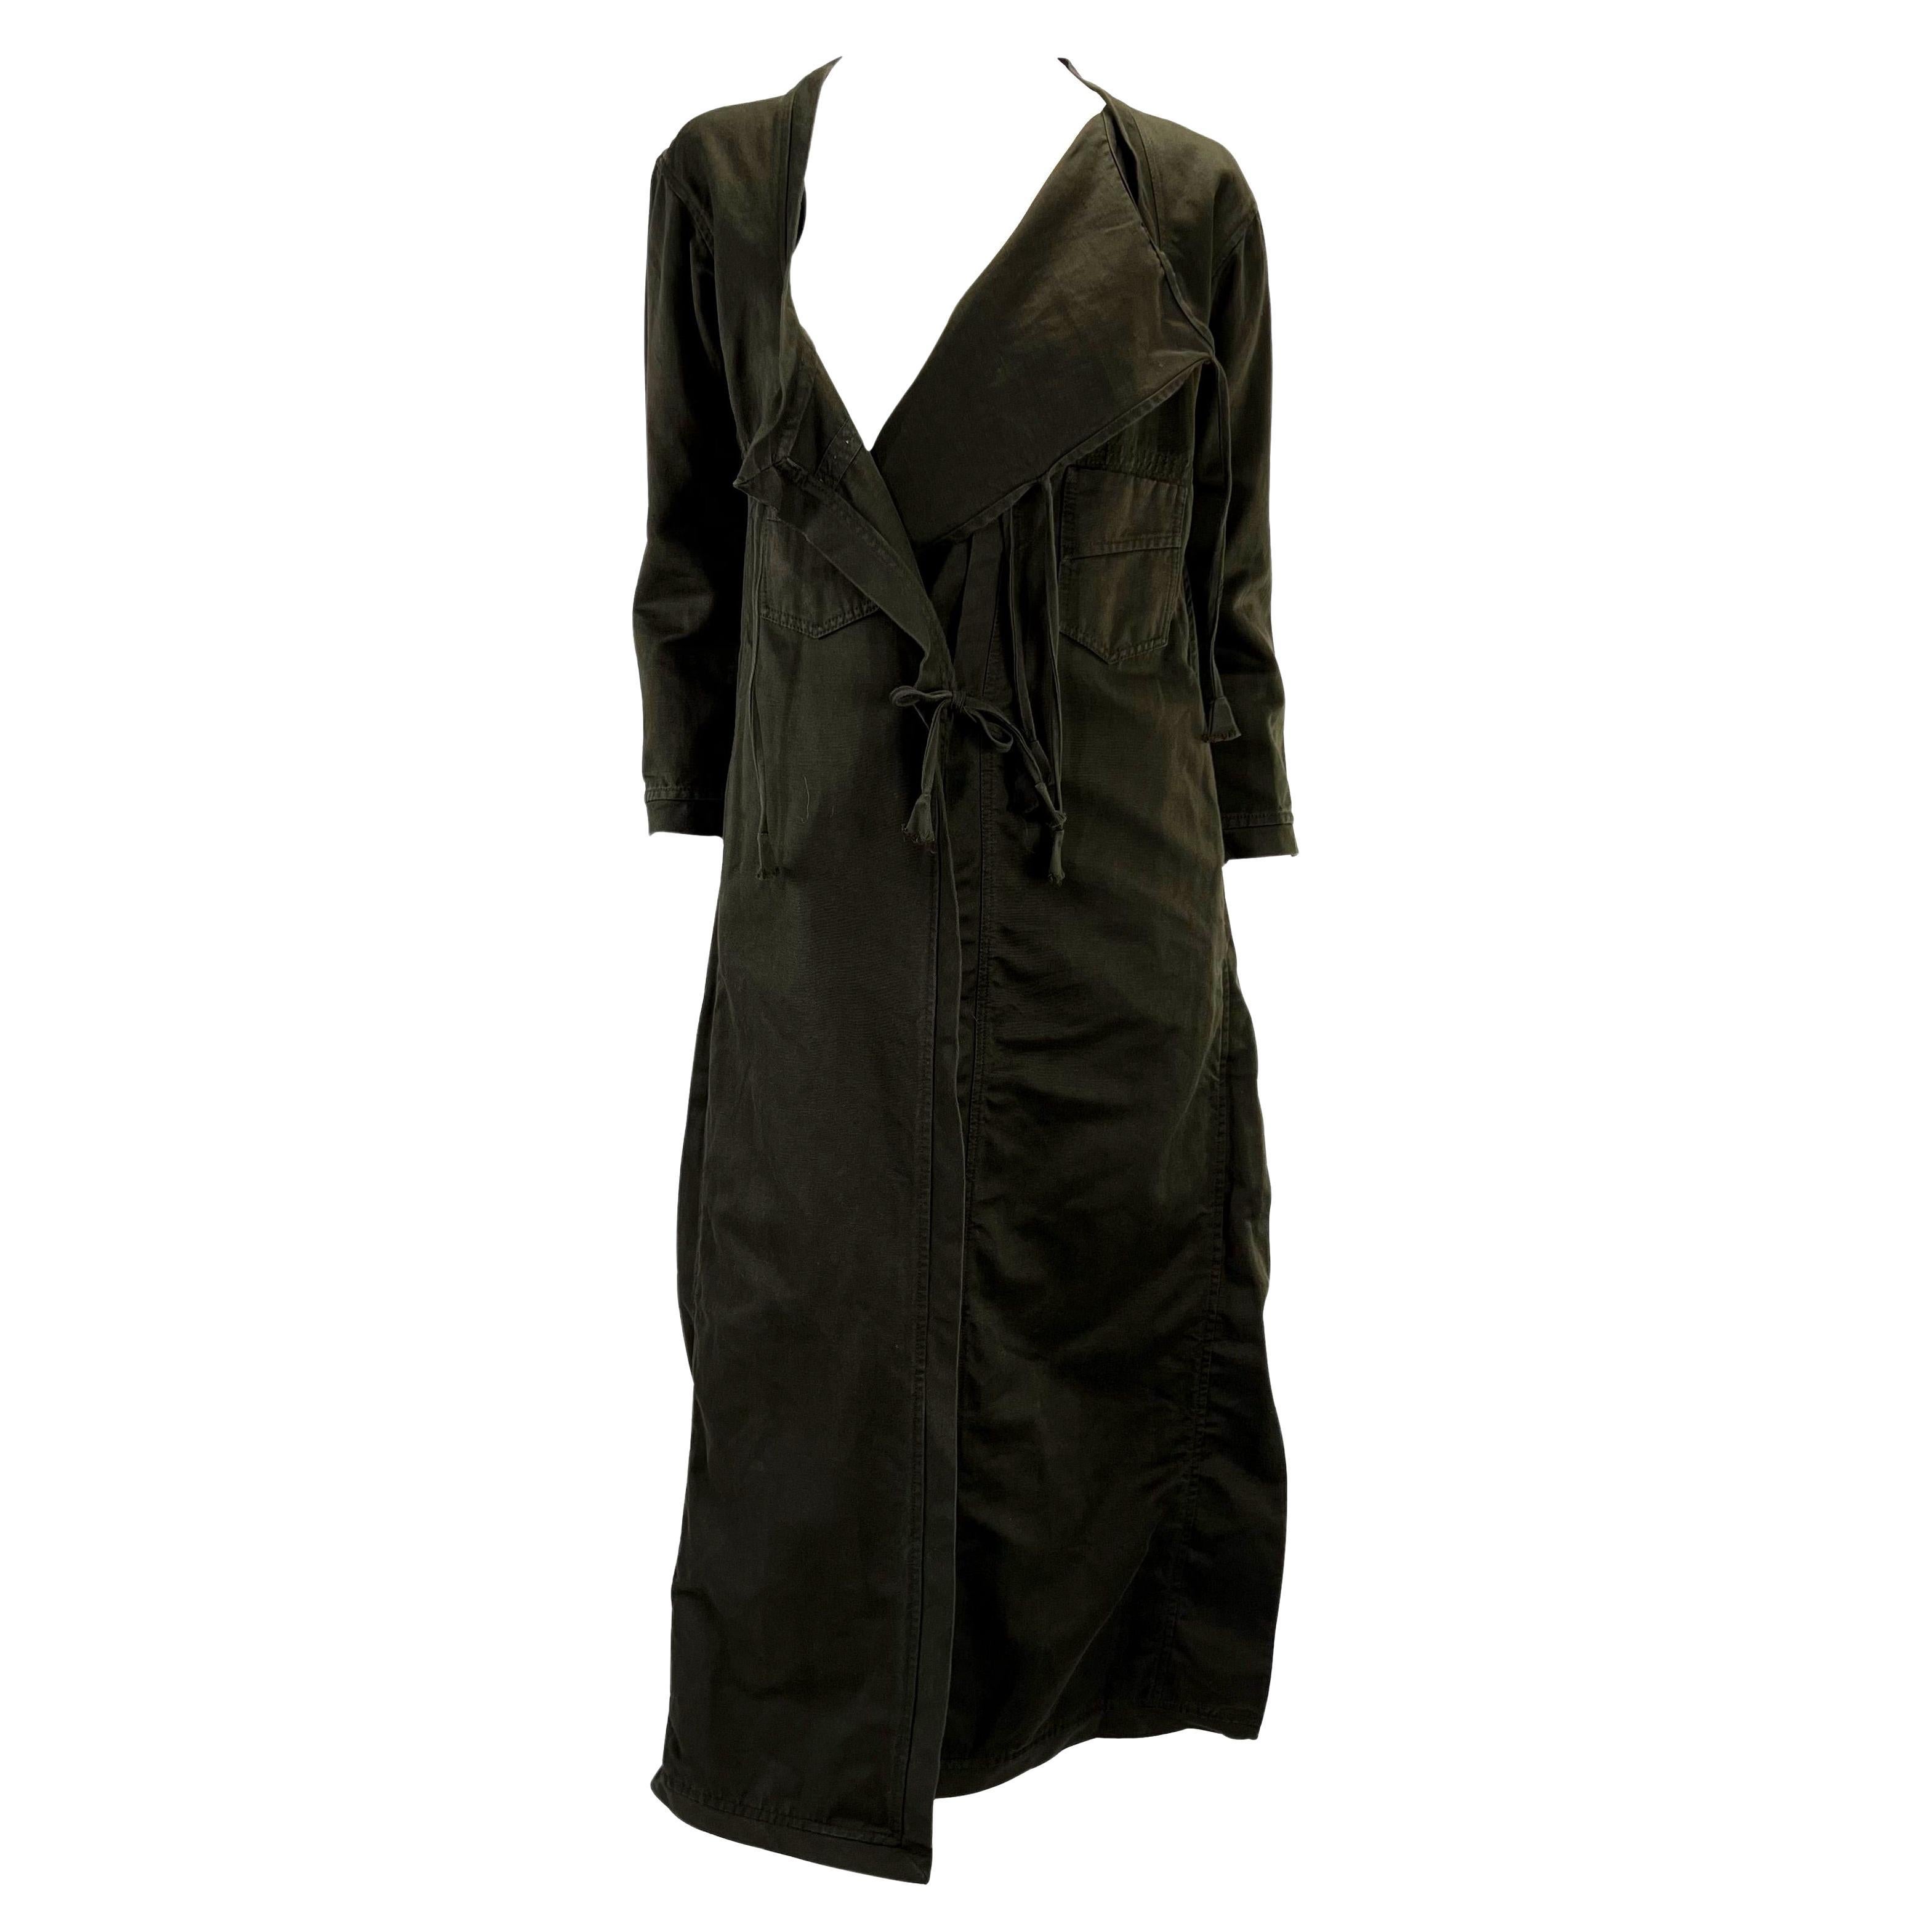 S/S 2002 Gucci by Tom Ford Brown Brown Cotton Oversized Cotton Duster Coat Dress